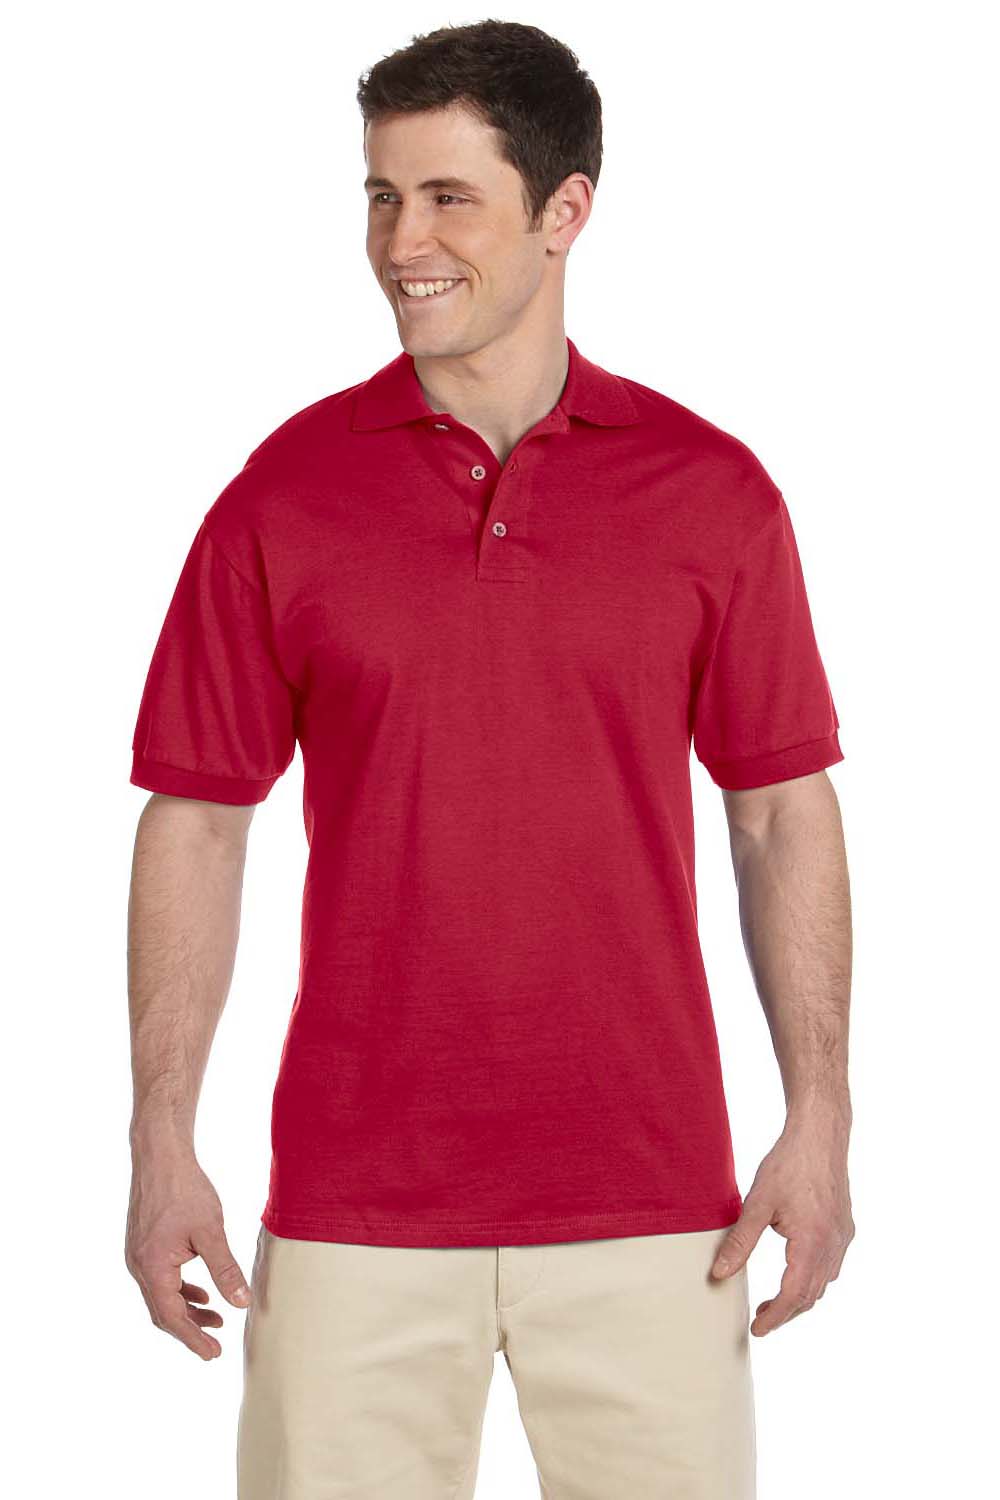 Jerzees J100 Mens Short Sleeve Polo Shirt Red Front